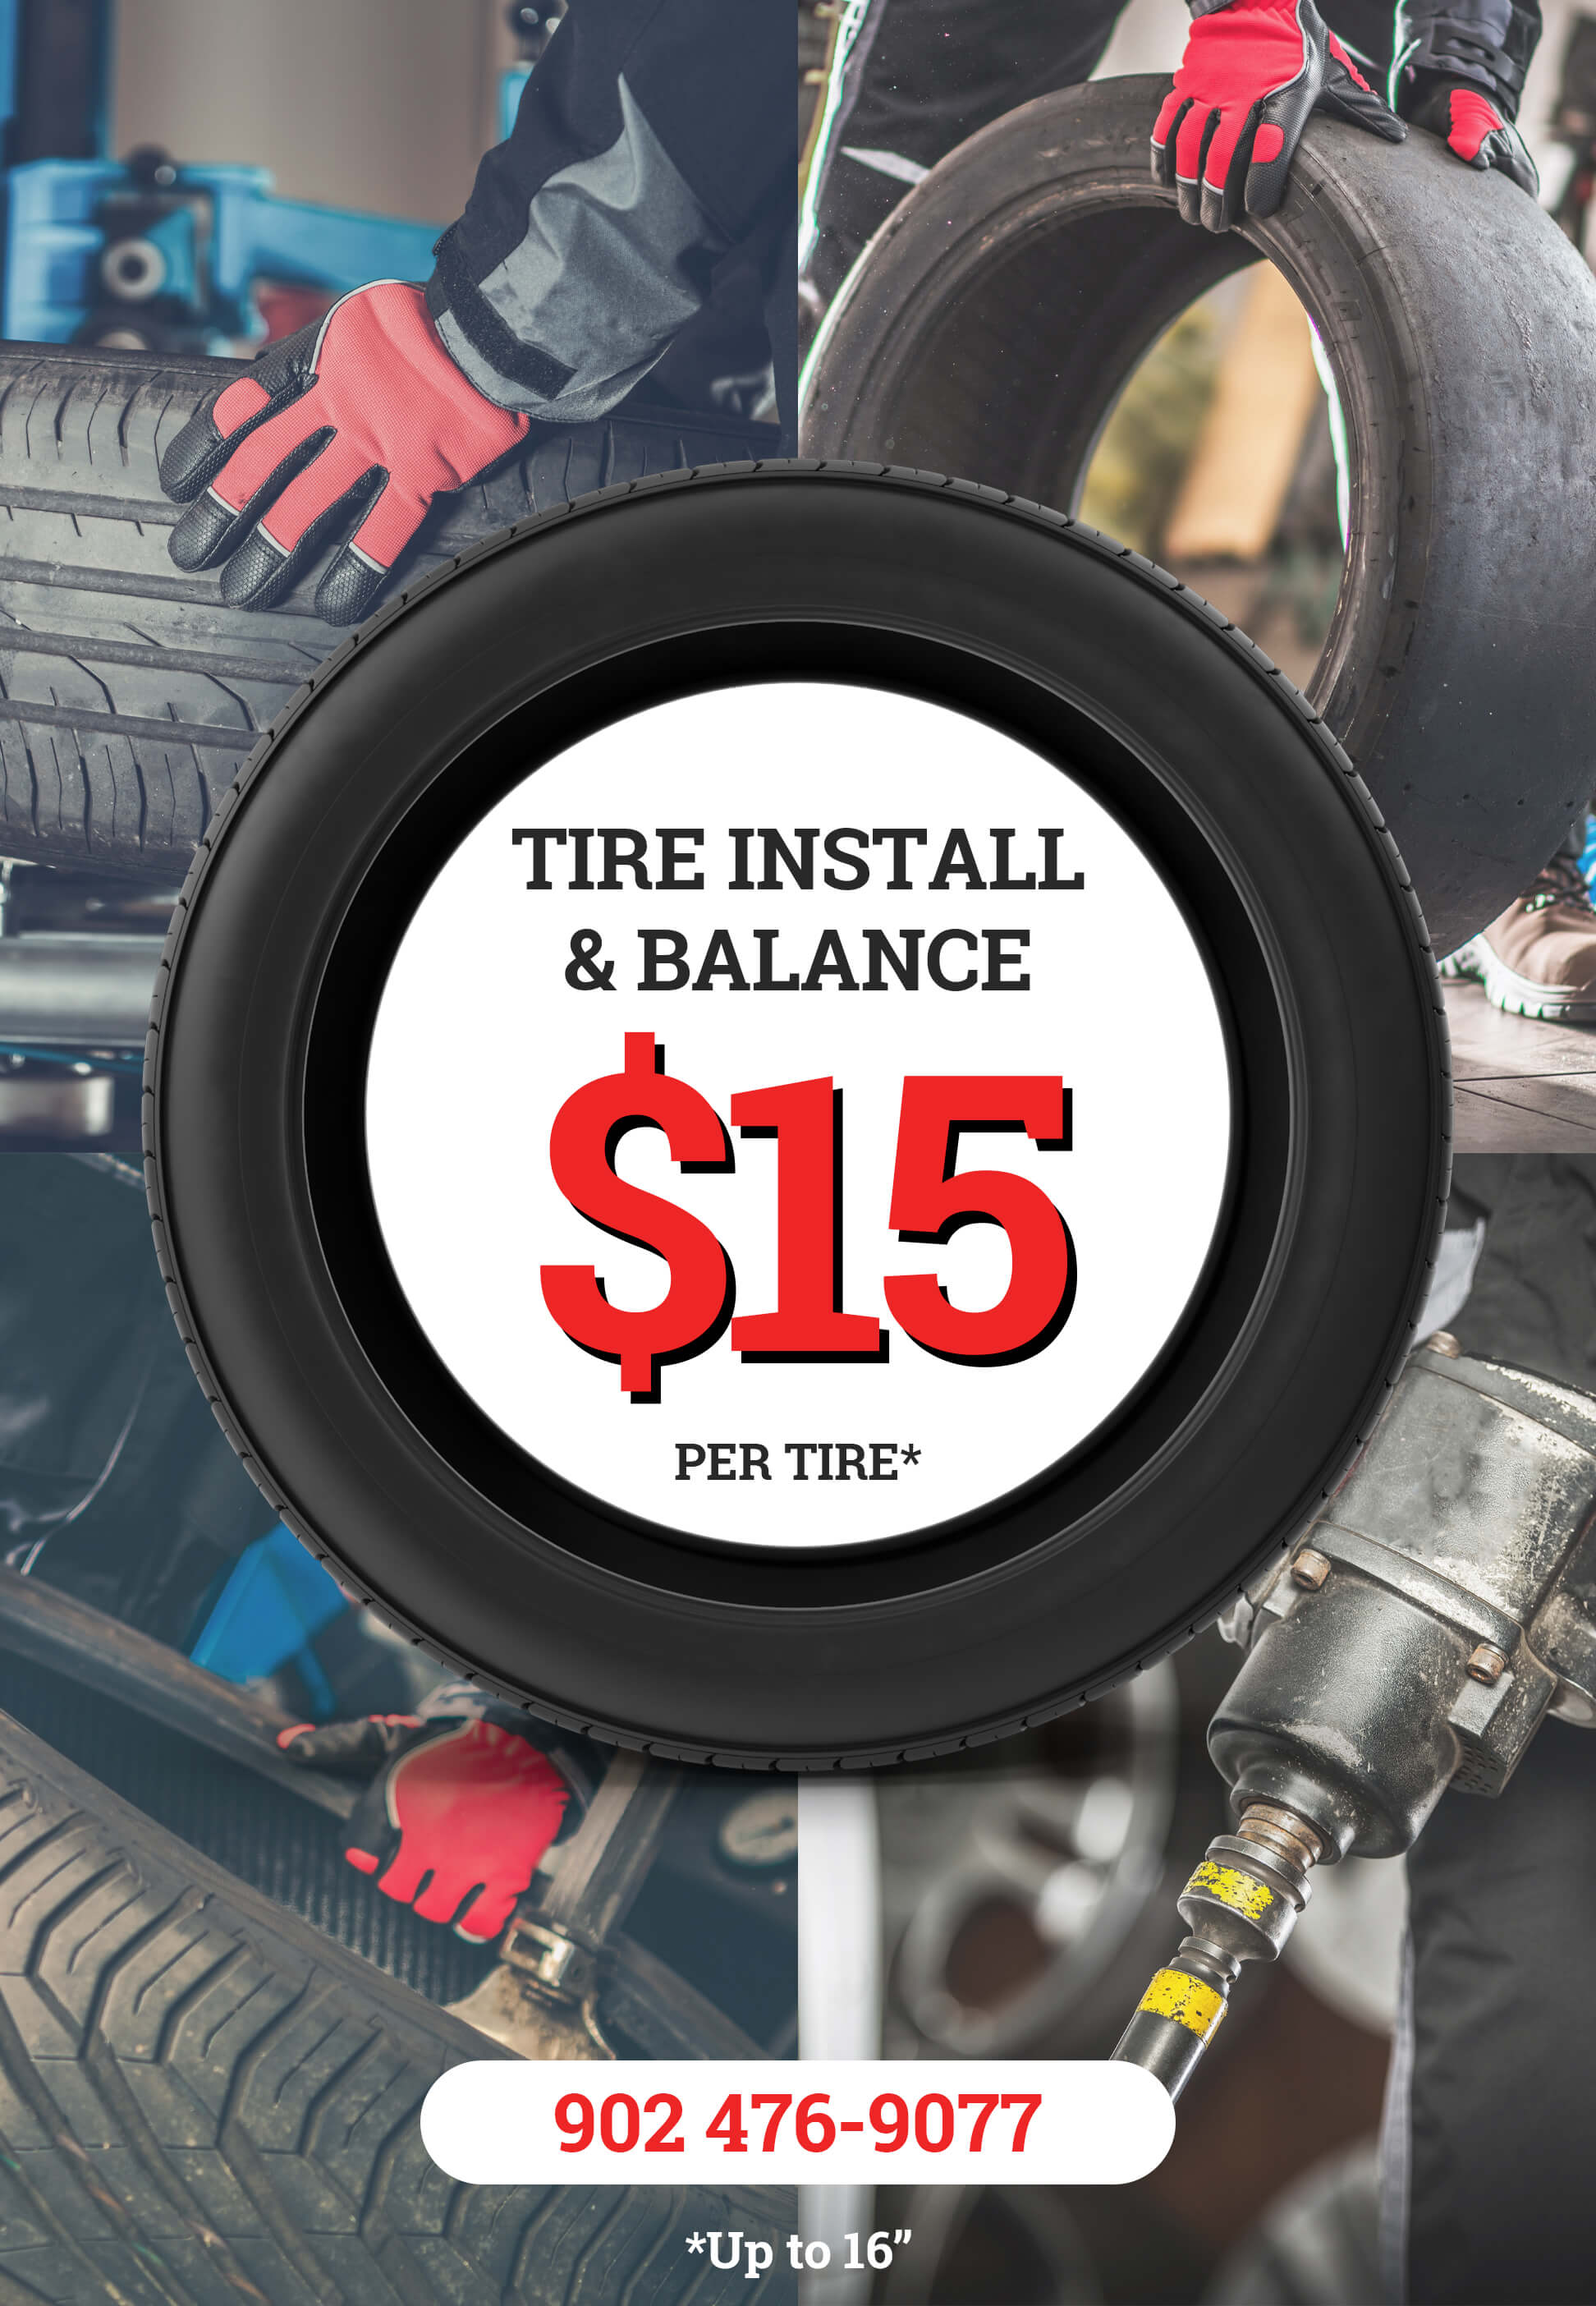 Tire balance & install starting at only $15.00 per tire with new tire purchase. *Up to 16